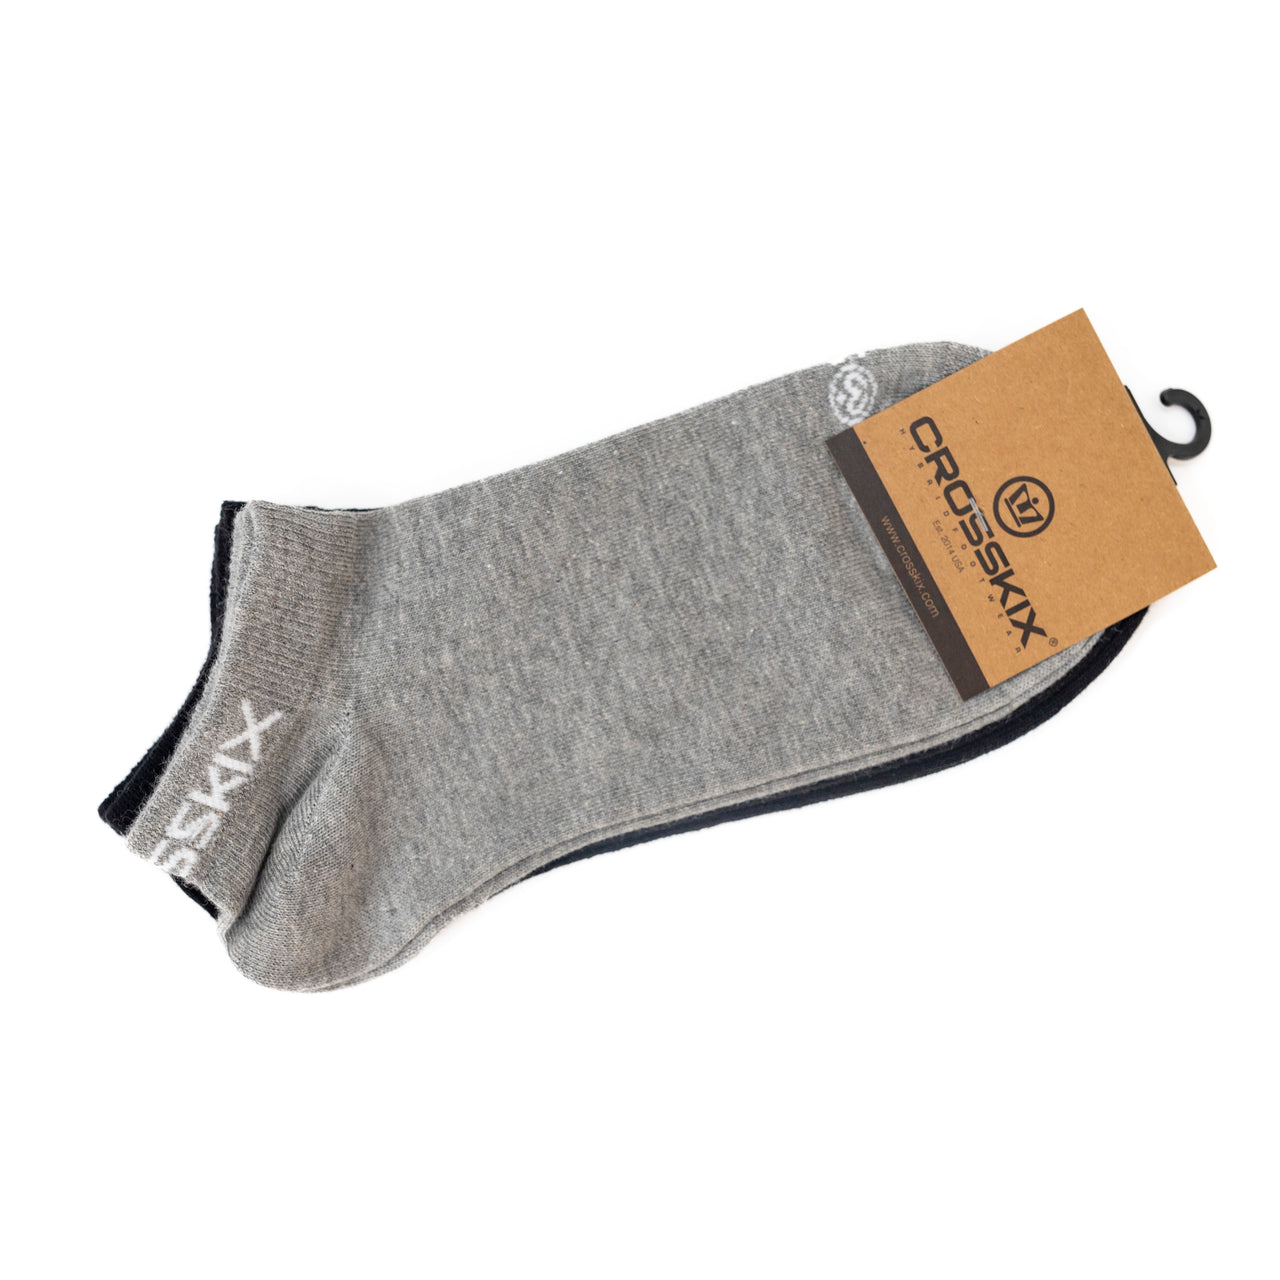 Low Ankle Turkish Cotton Socks for Men 2 Pair Pack - Size 8-12